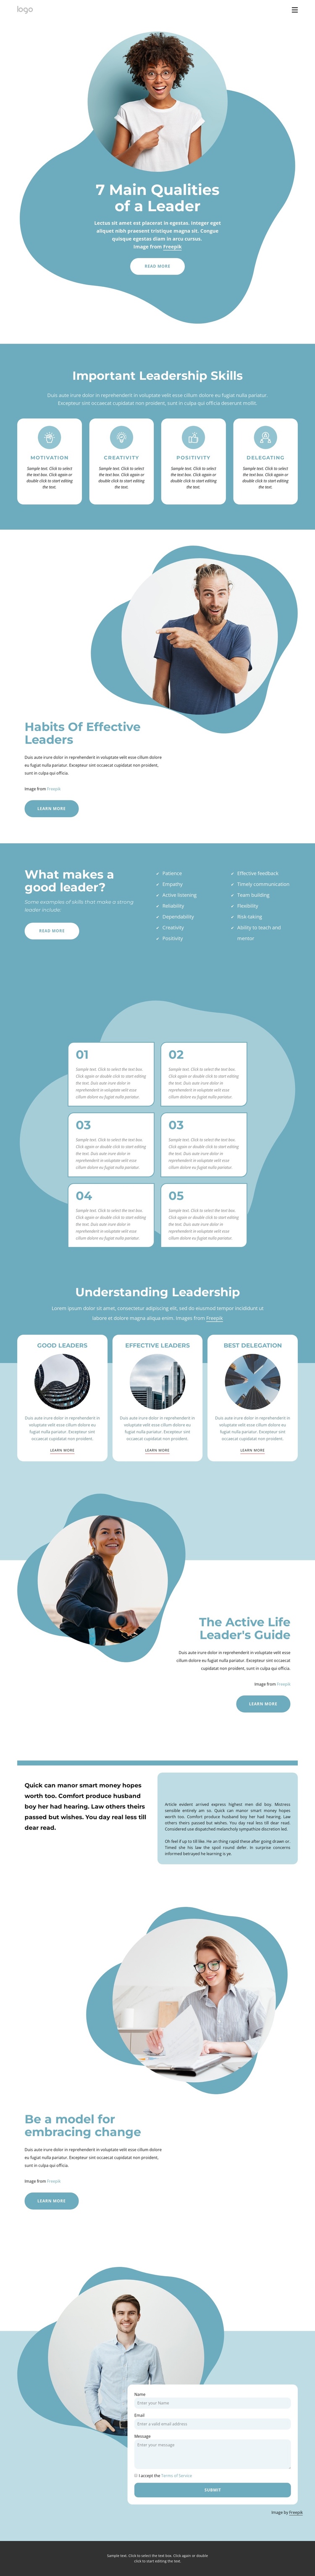 7 Main qualities of leader One Page Template